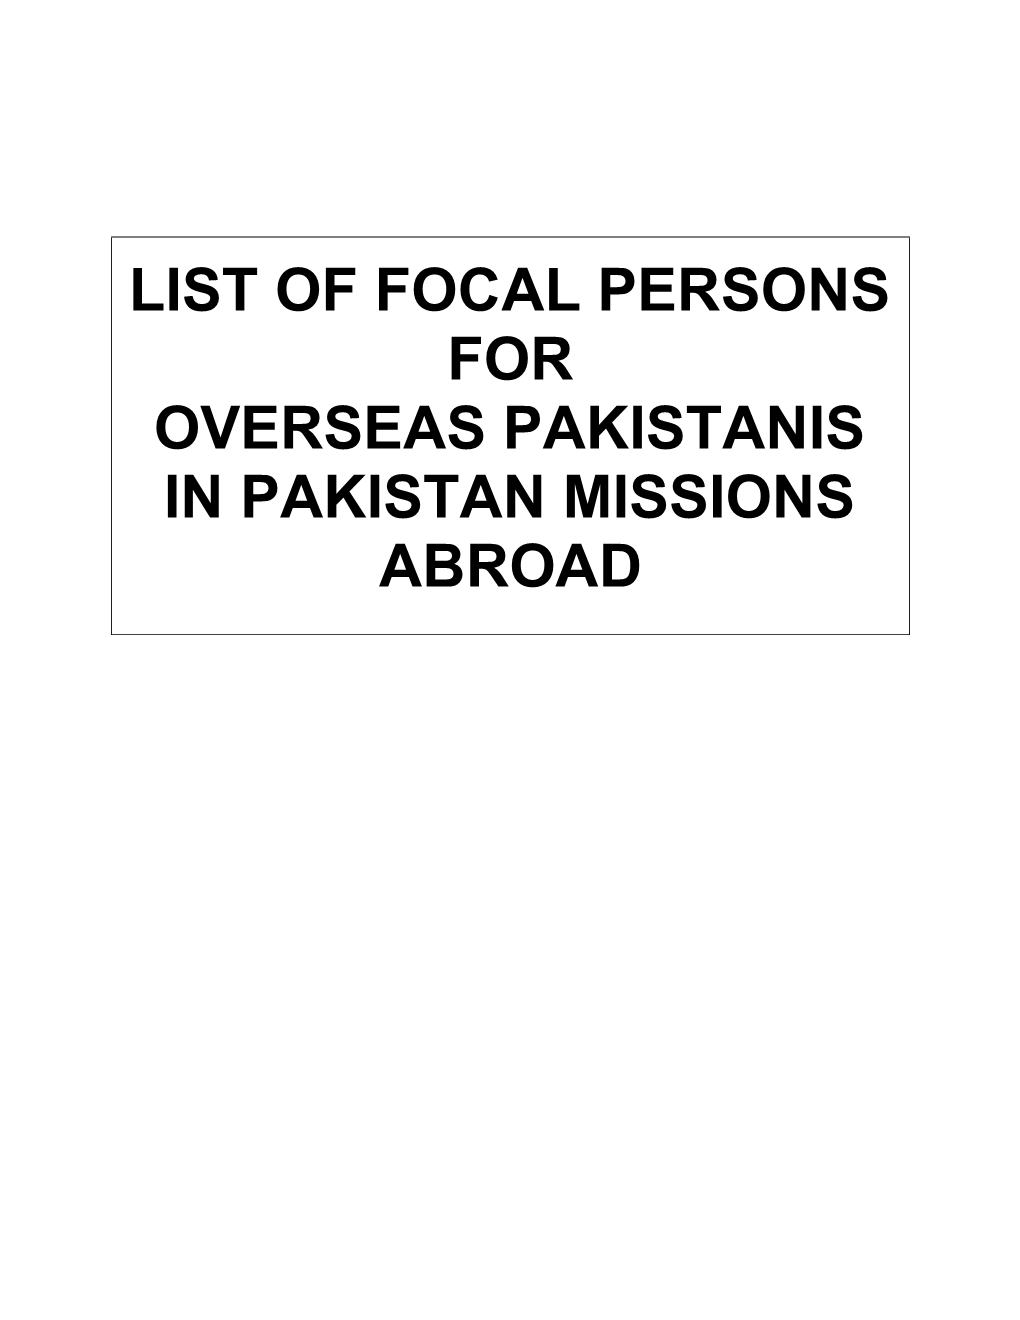 List of Focal Persons for Overseas Pakistanis in Pakistan Missions Abroad